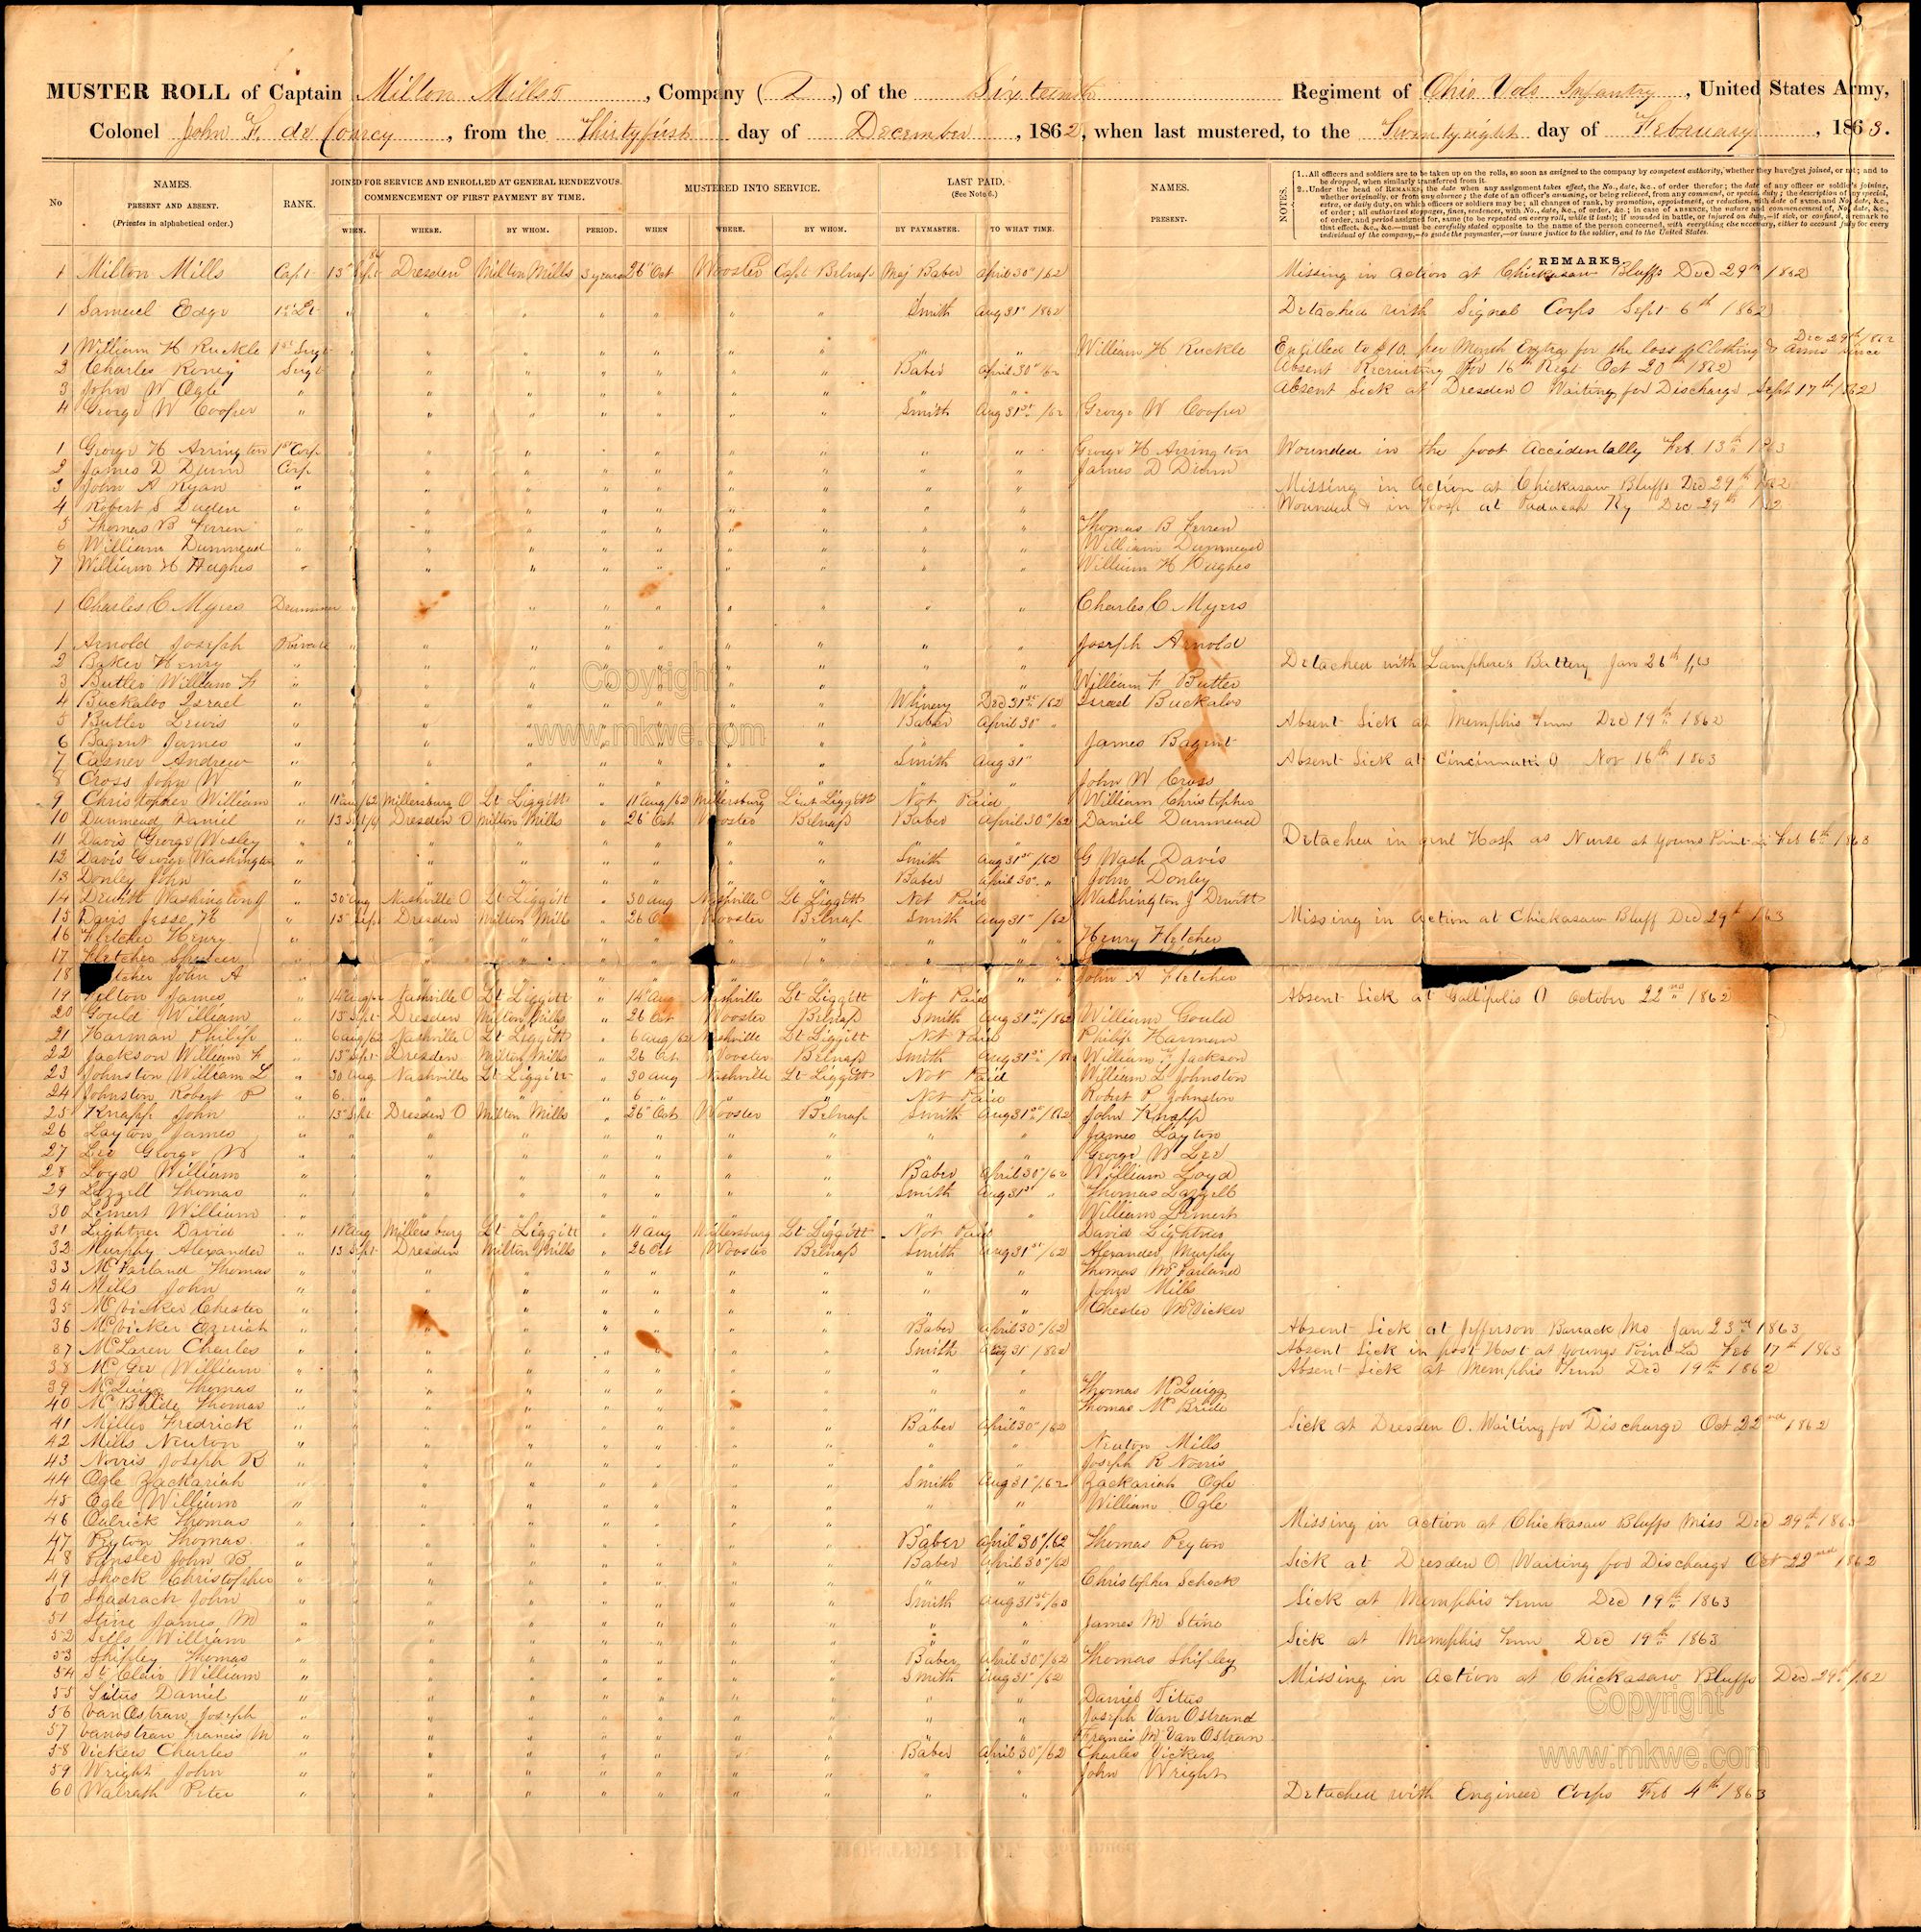 Muster Roll - front